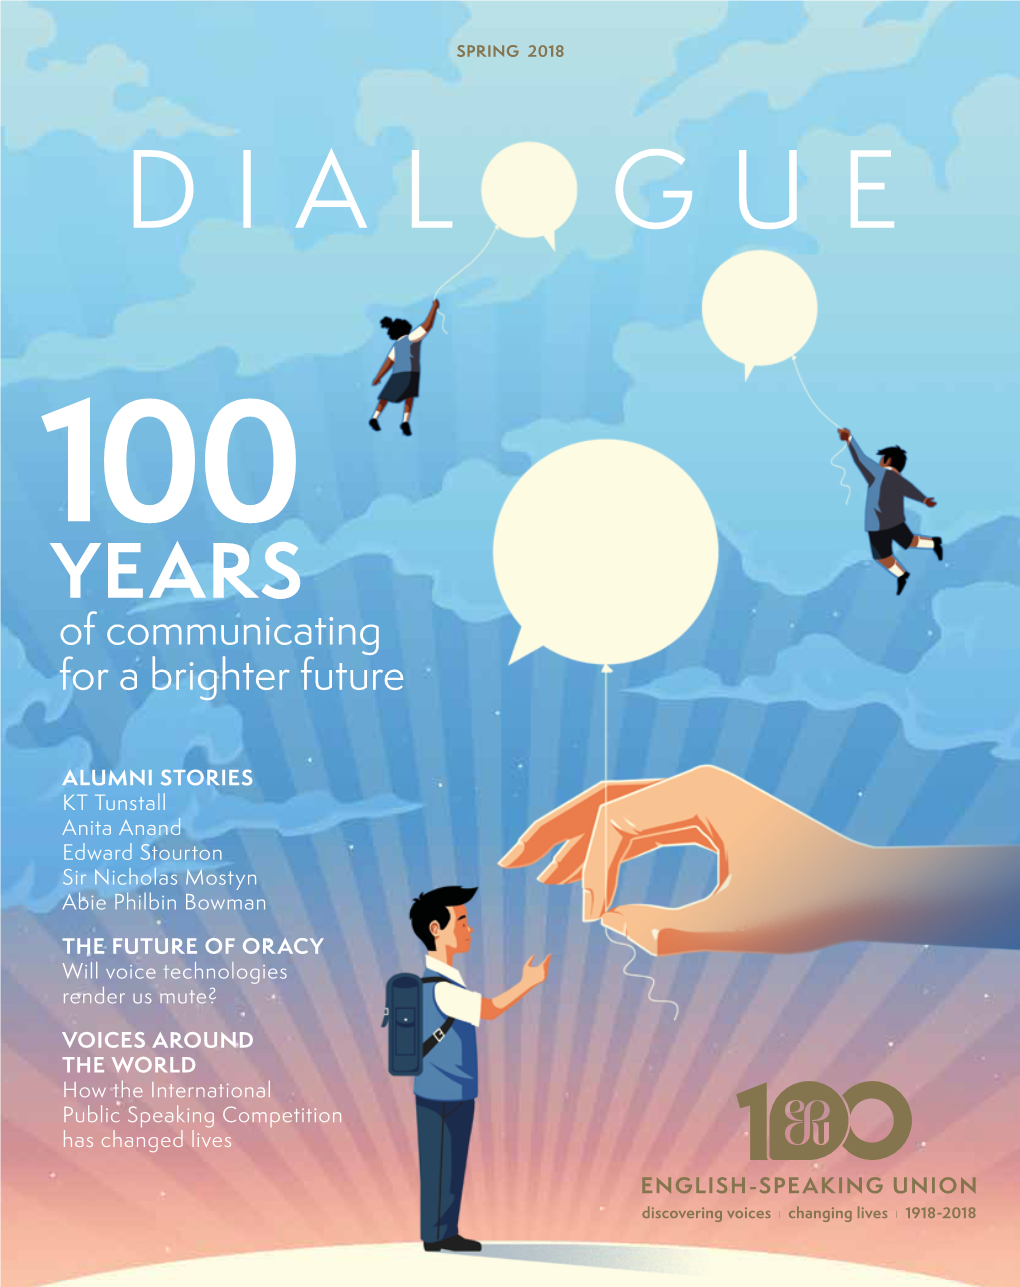 DIALOGUE 100 YEARS of Communicating for a Brighter Future